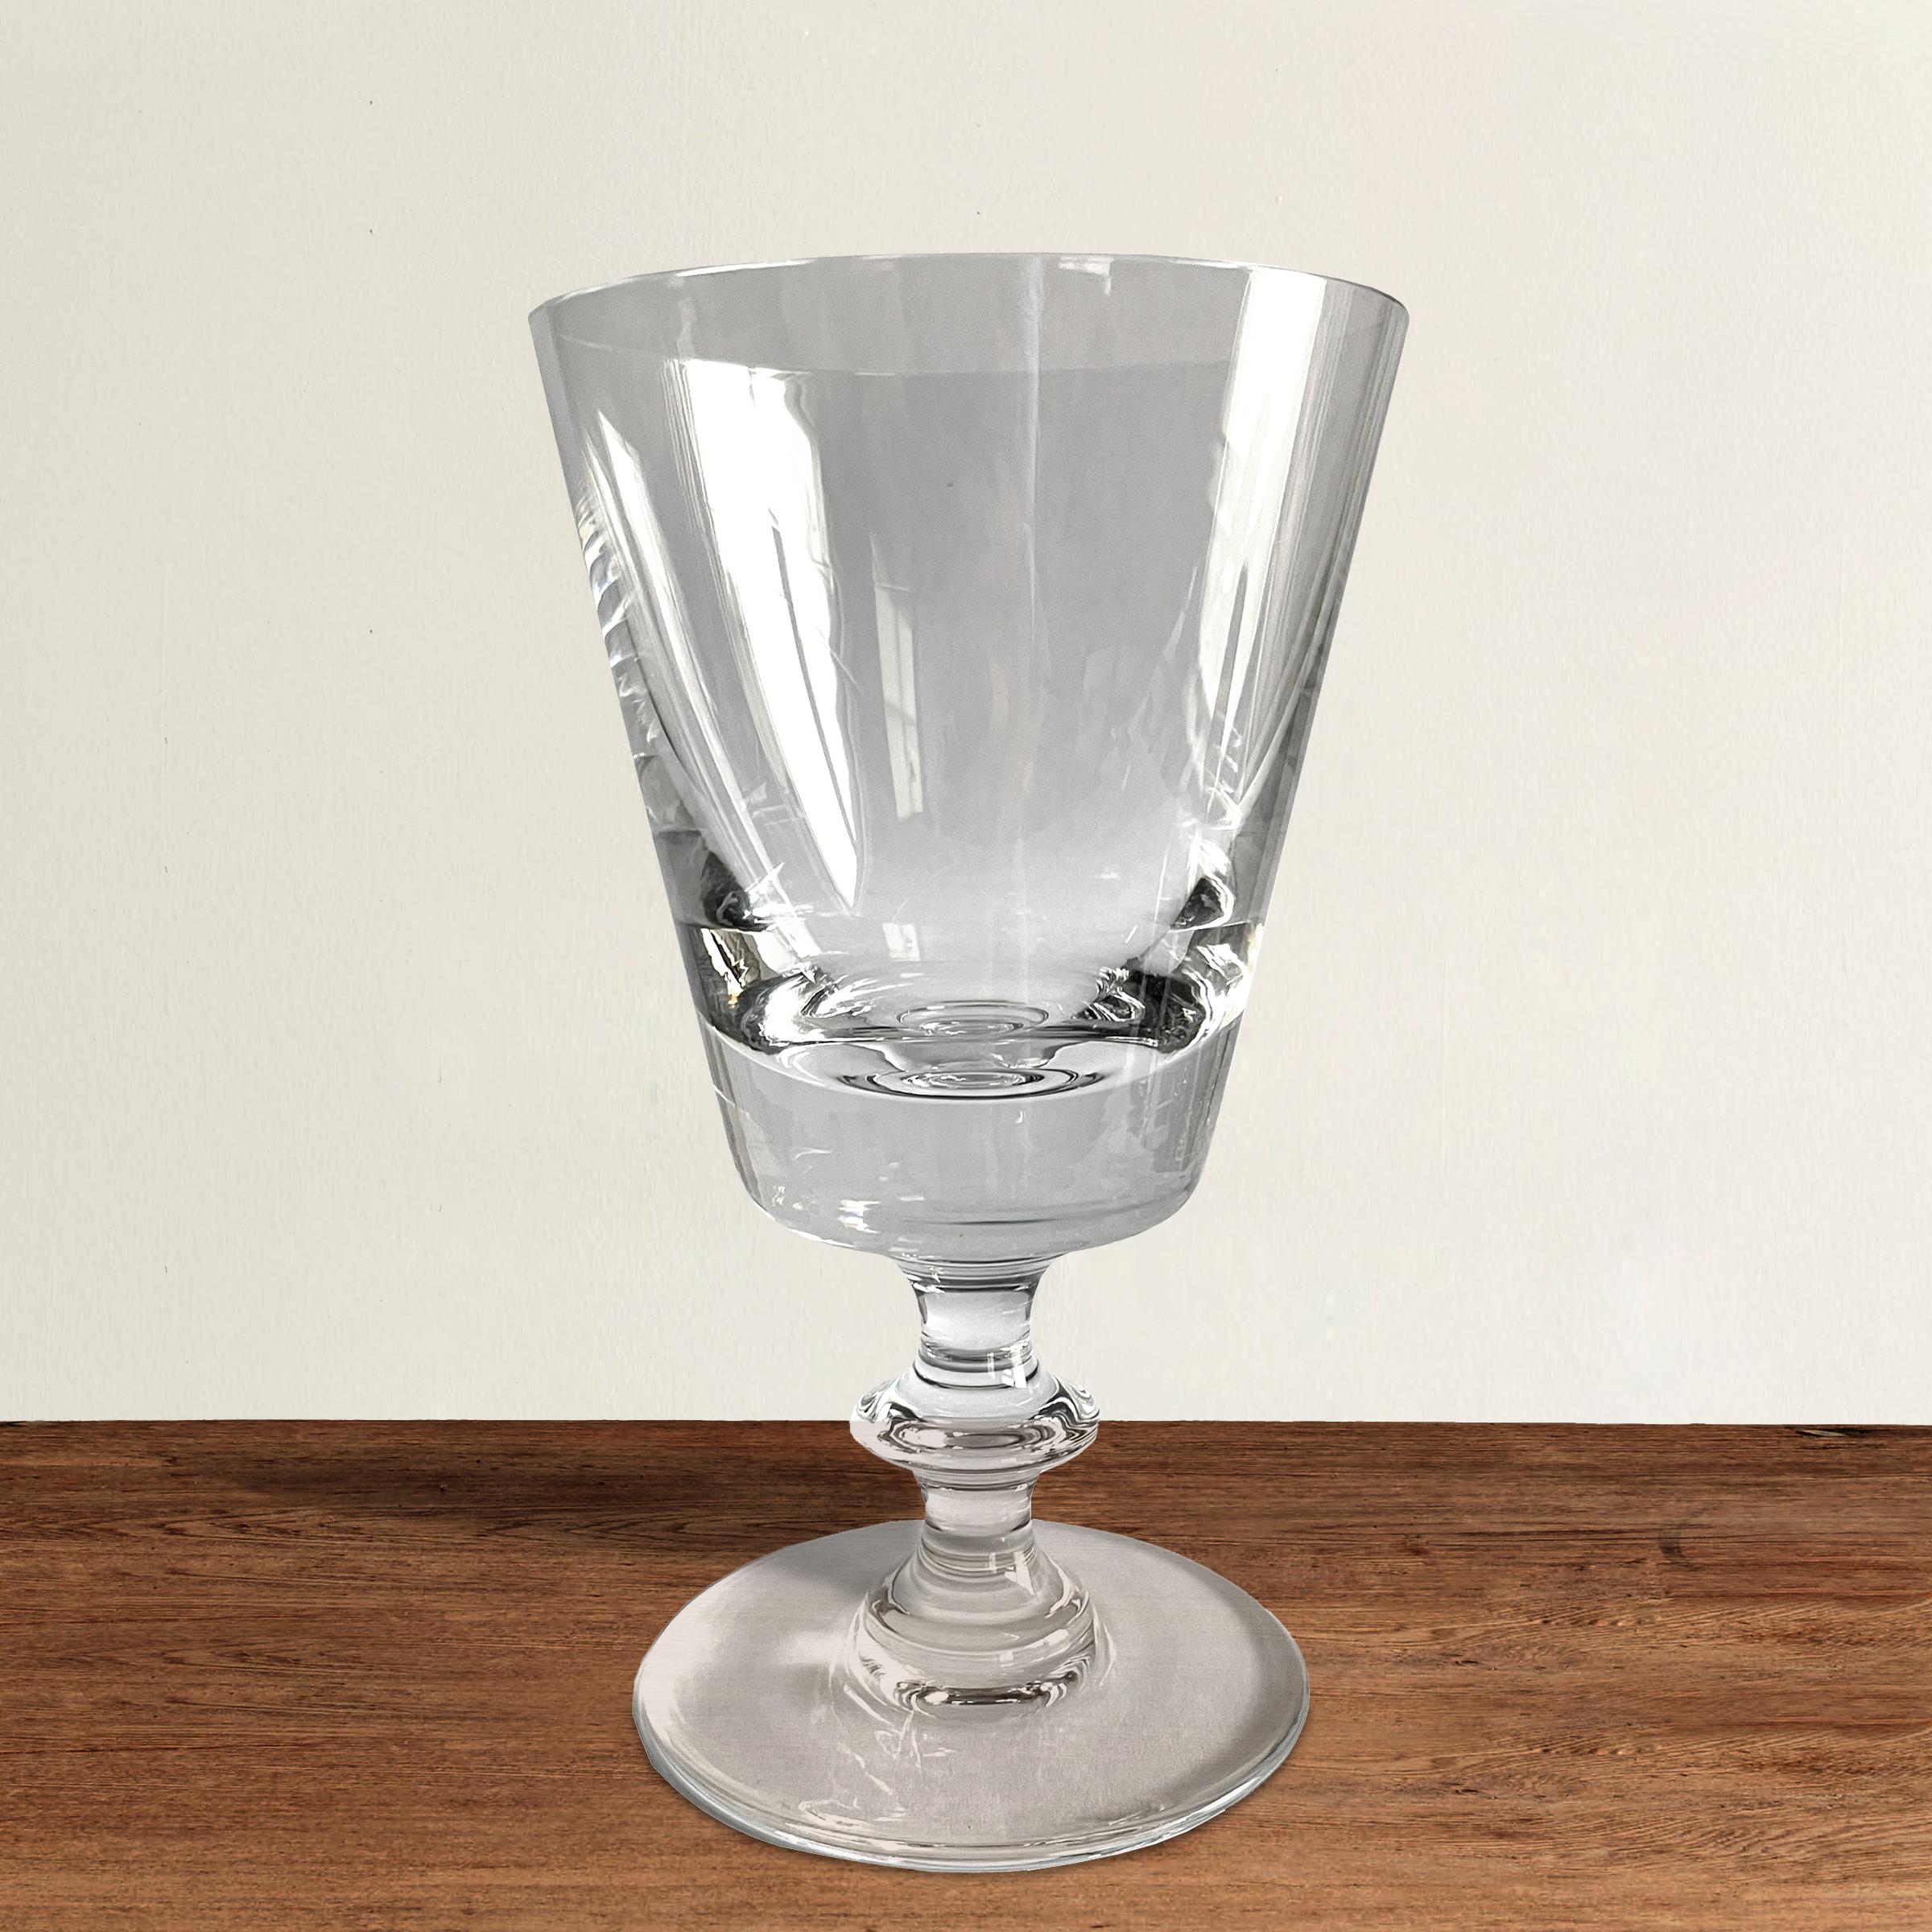 A covetable set of ten blown crystal wine glasses by famed Belgian crystal company, Val Saint Lambert, in the State Plain pattern, each with a simple bowl with straight sides and a stem with a single knot and resting on a wide flat foot. Marked,